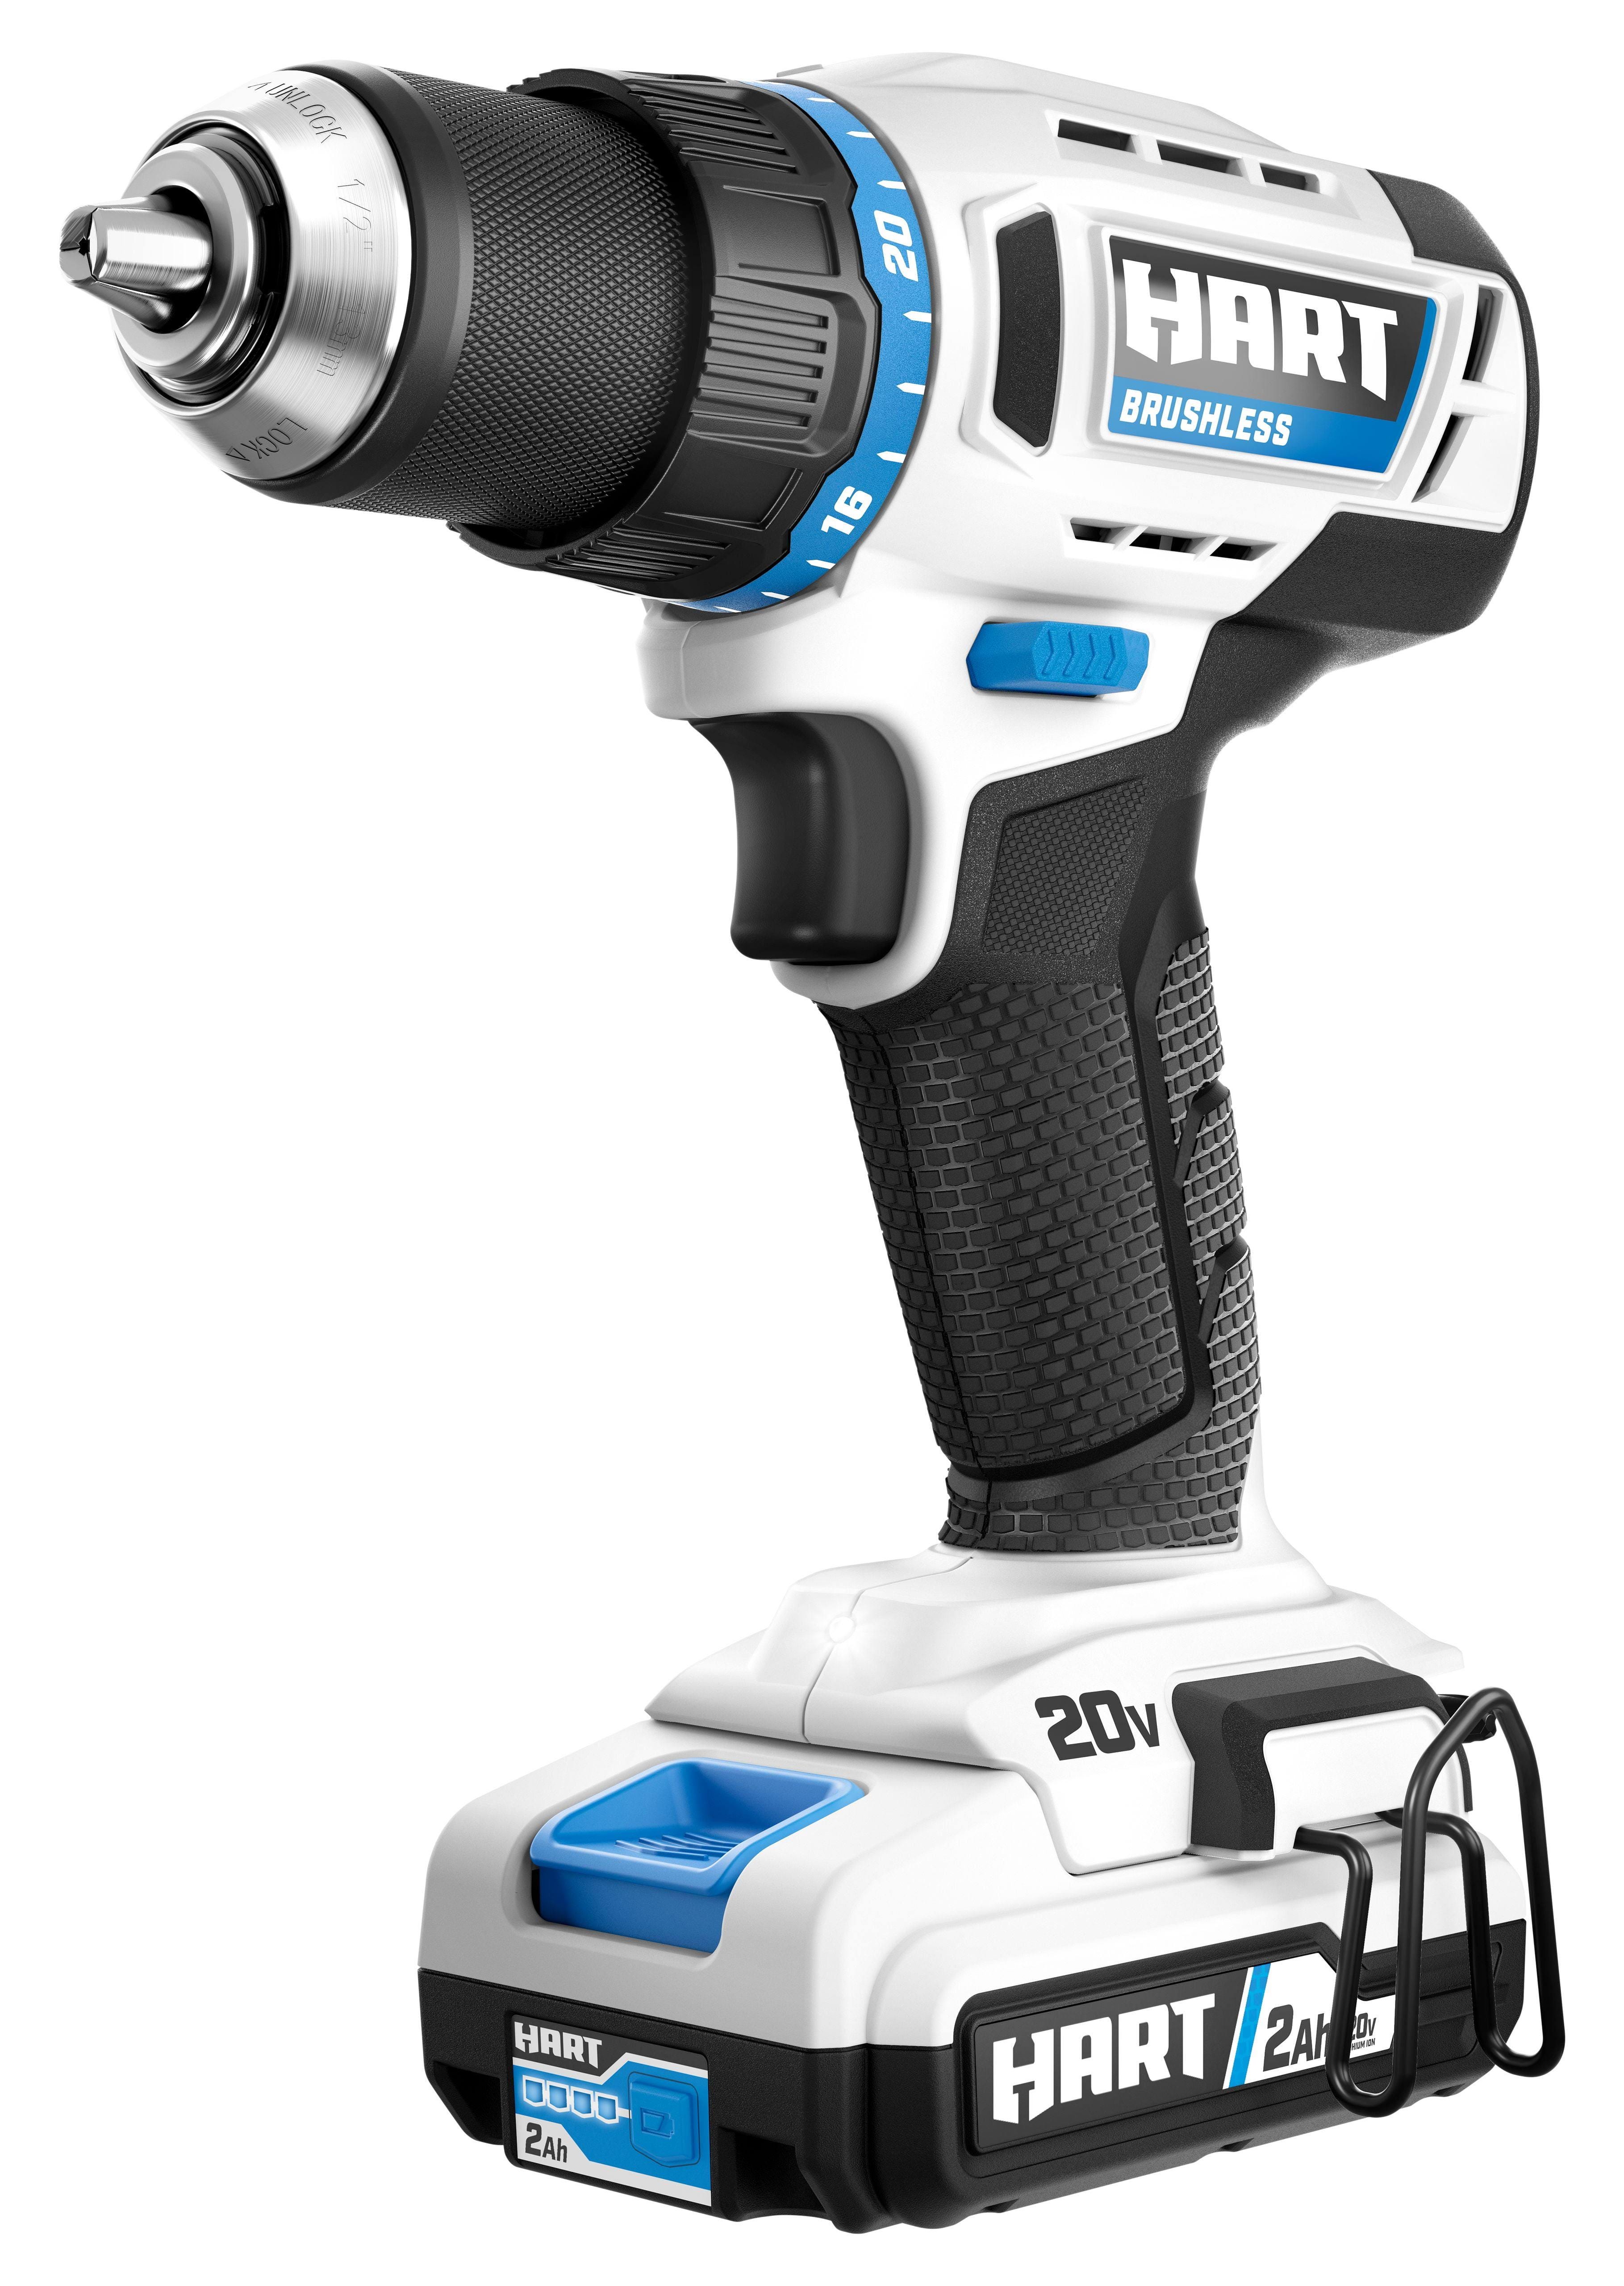 Powerful Brushless Half-Inch Drill/Driver Kit | Image